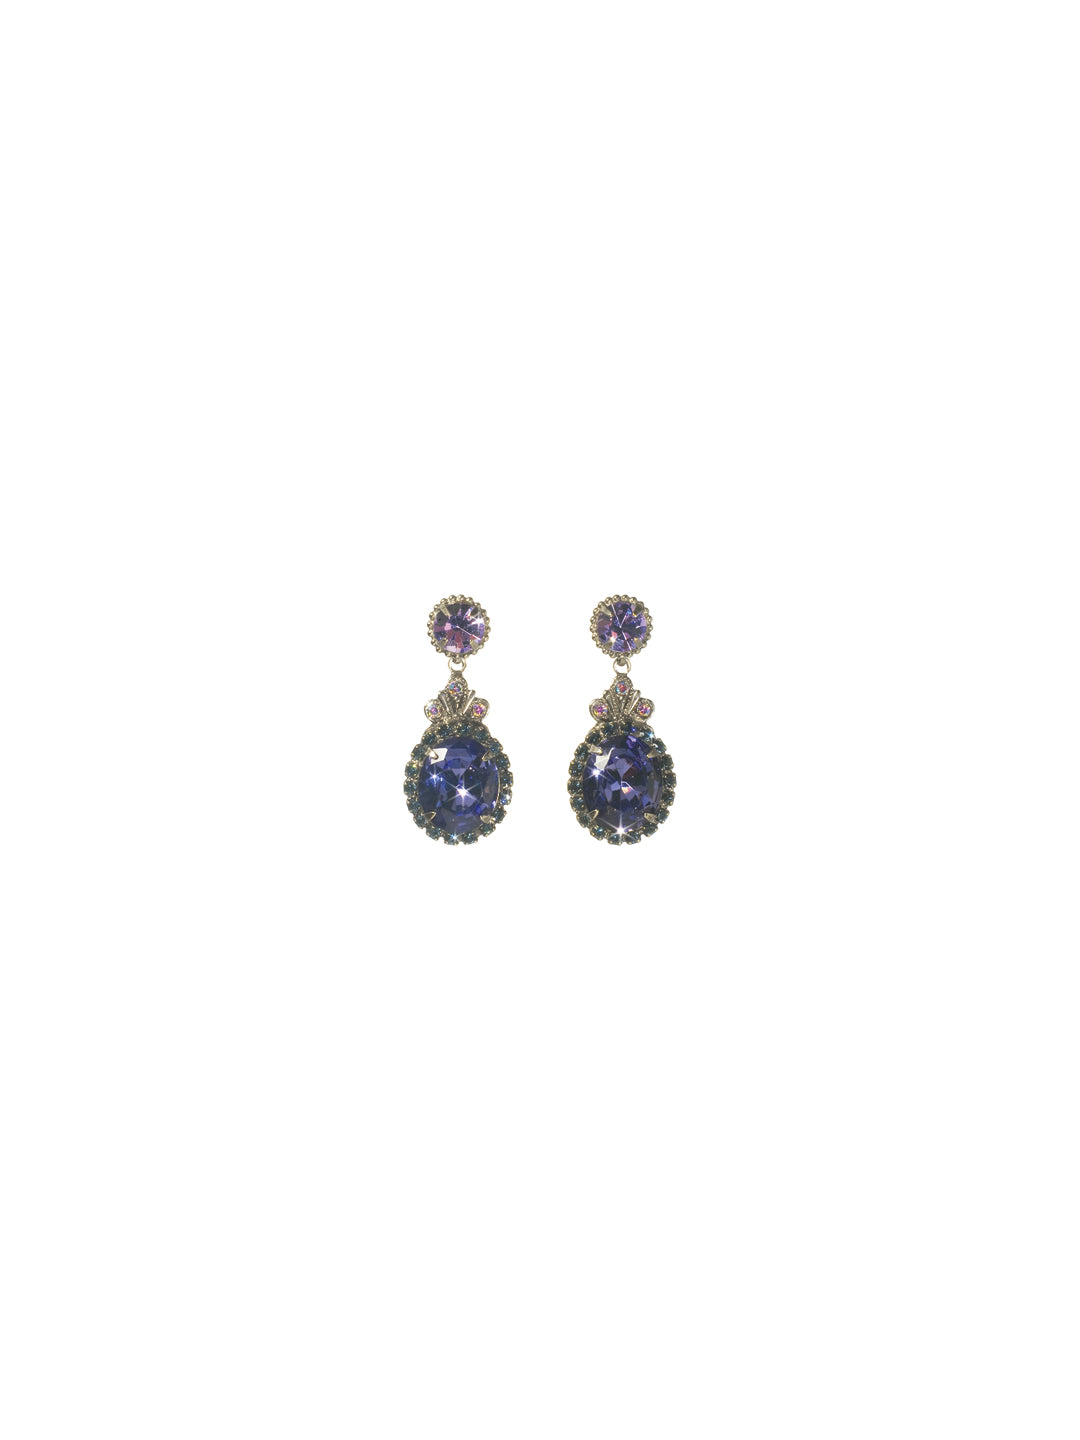 Solar Sparkle Earring - ECJ2ASHY -  From Sorrelli's Hydrangea collection in our Antique Silver-tone finish.